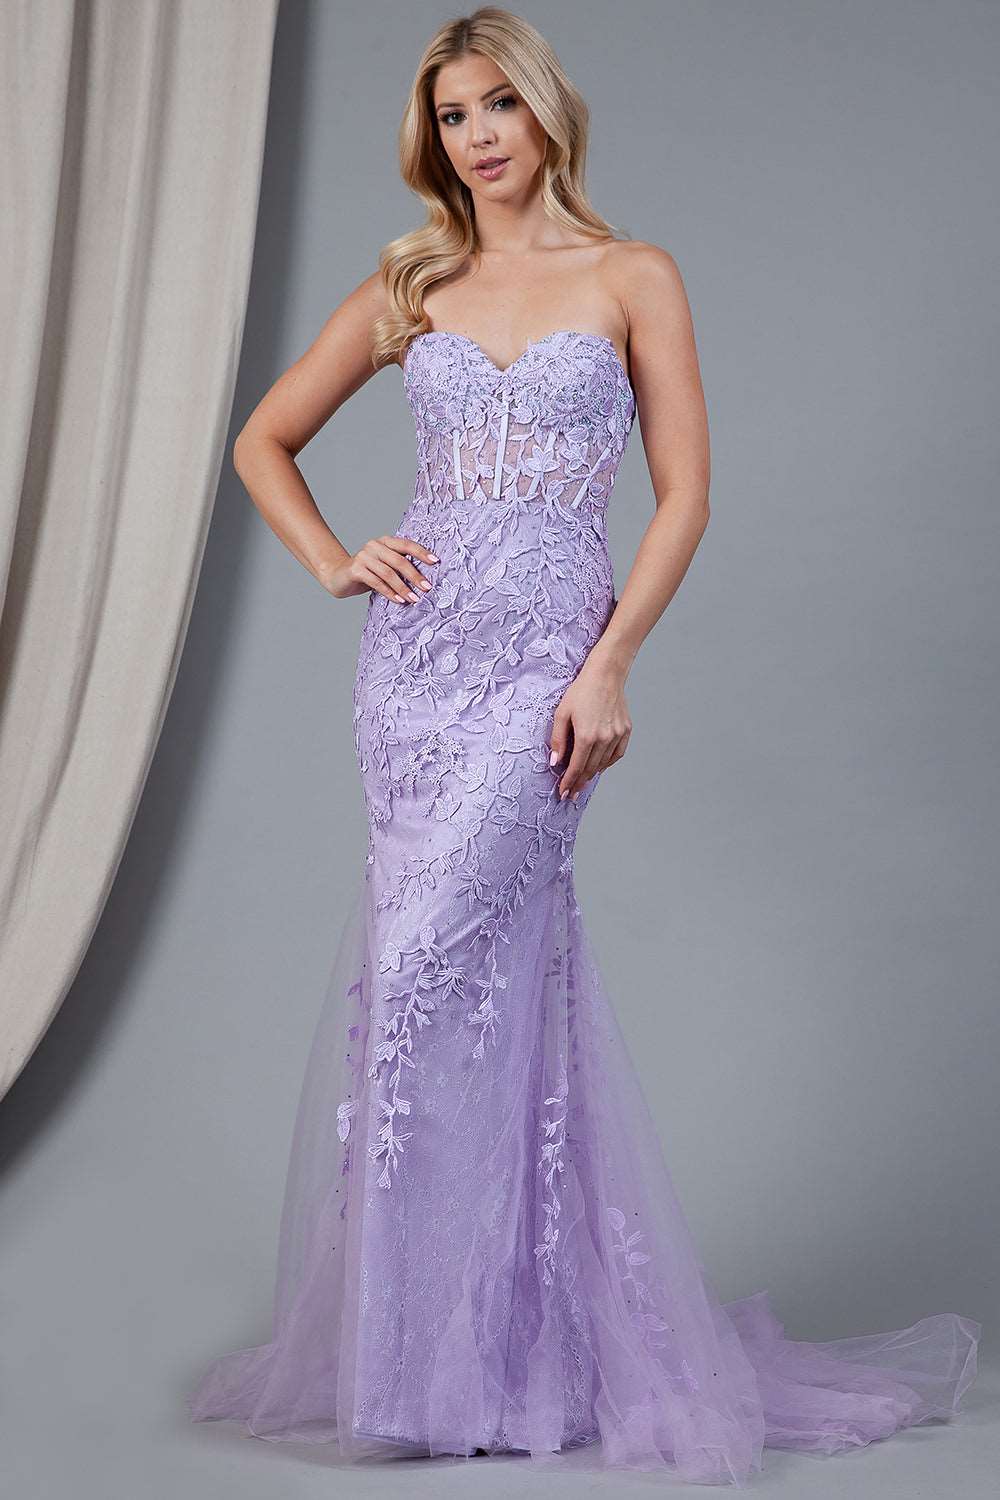 AC 7024 - Strapless Embroidered Fit & Flare Prom Gown with Sheer Boned Bodice & Lace Up Corset Back PROM GOWN Amelia Couture 0 LILAC 